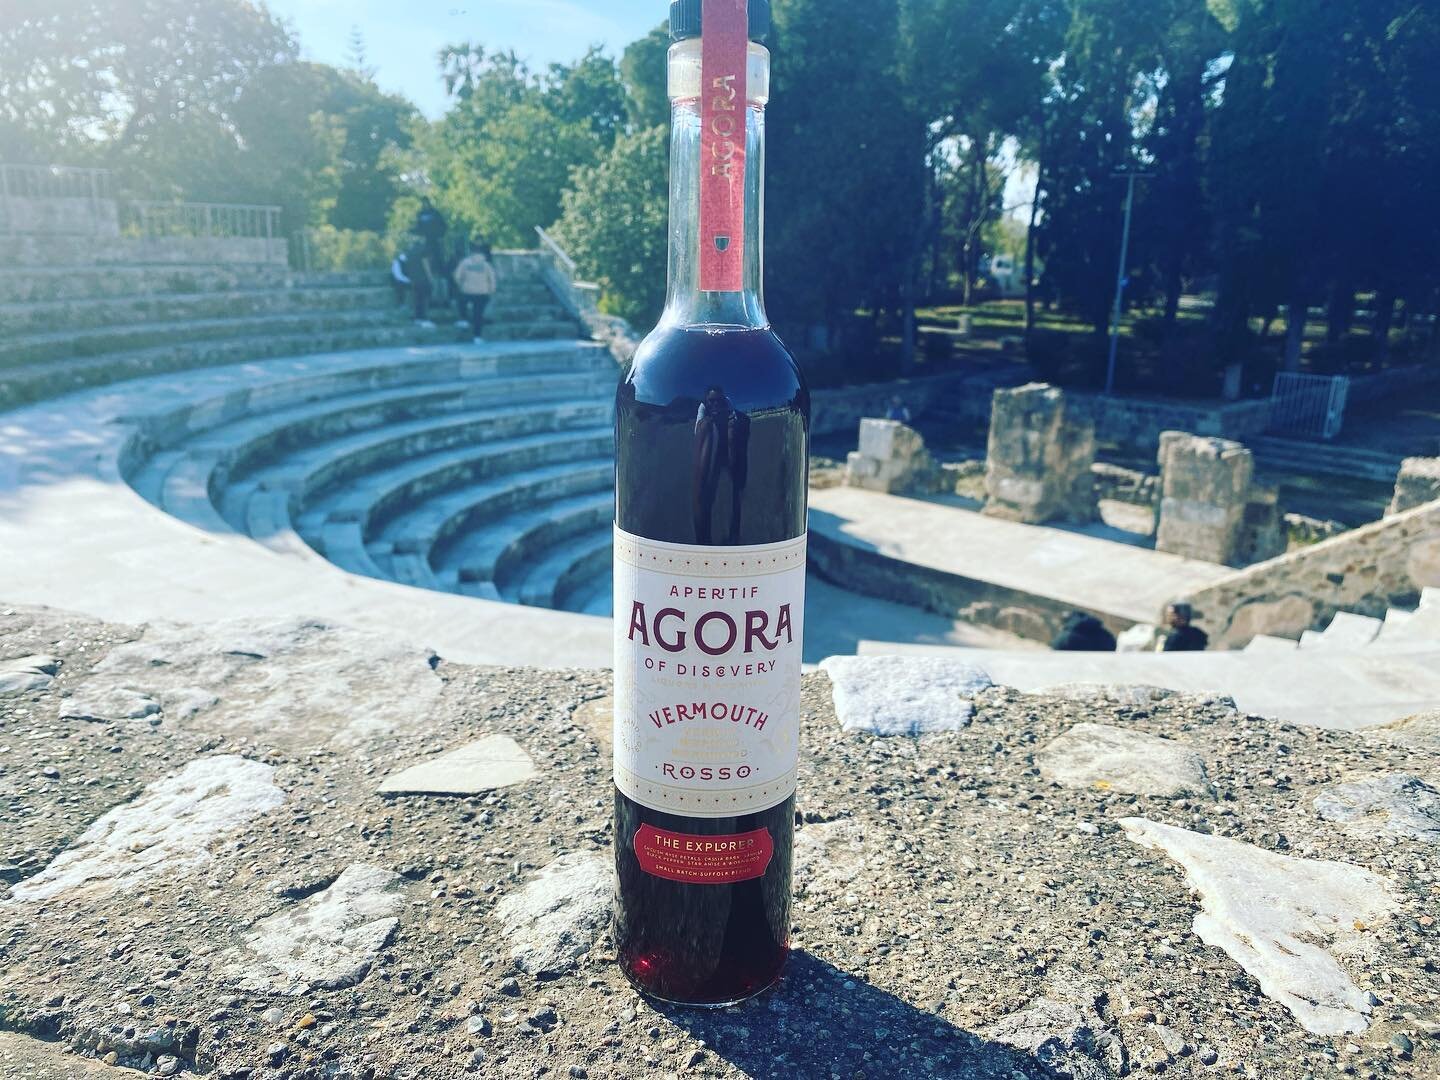 In antiquity, people would gather far and wide to the ancient agora. Spices, silks and wine were traded. Spices and wine needed to make our vermouth. 

#agora #winelover #vermouth #vermouthtime #vermouthlovers #vermutlovers #vermut #ancientgreece #ap